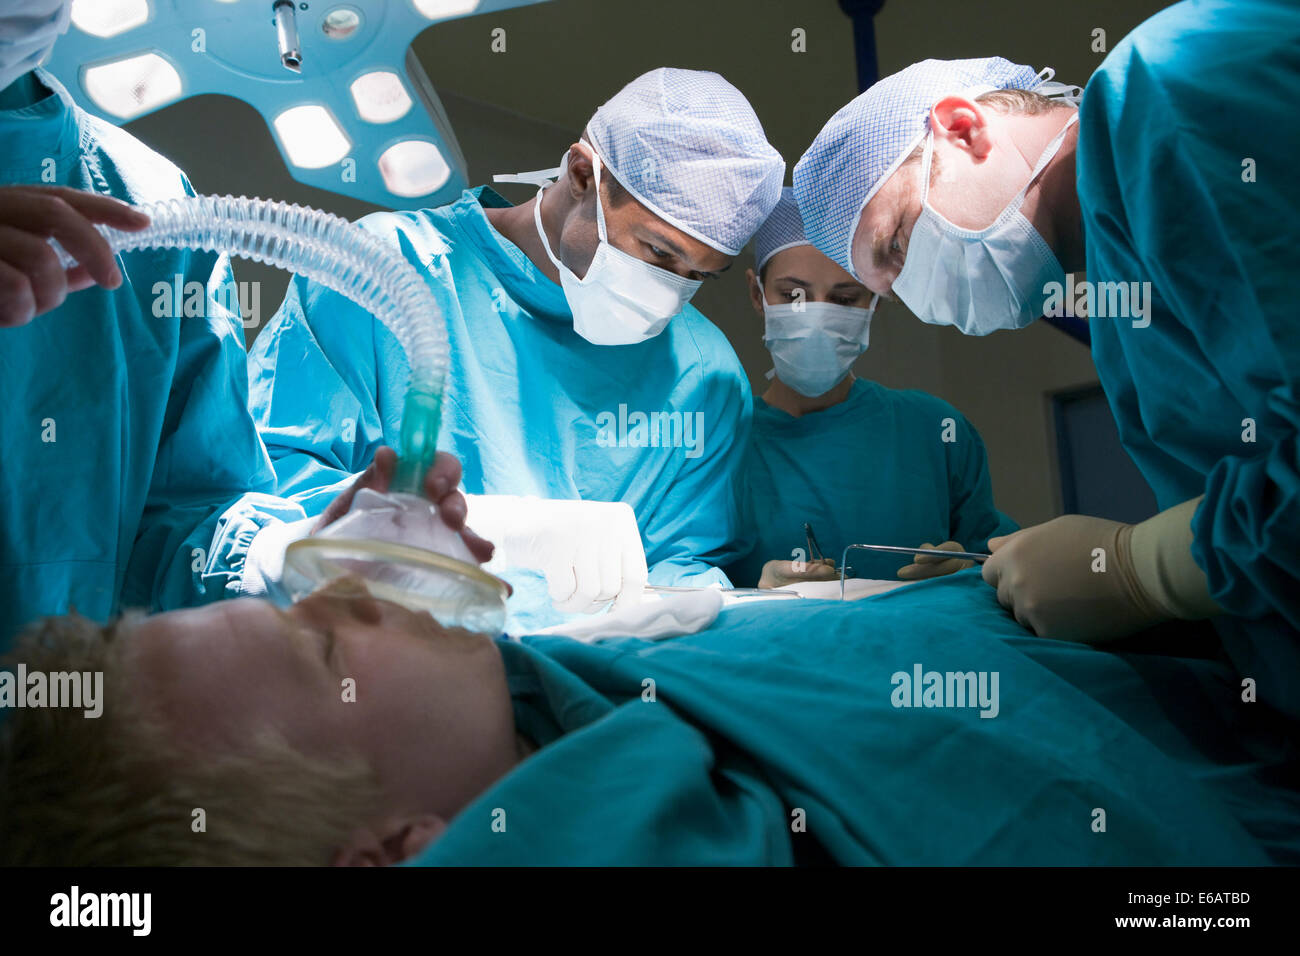 hospital,patient,surgeon,surgery,operating room Stock Photo